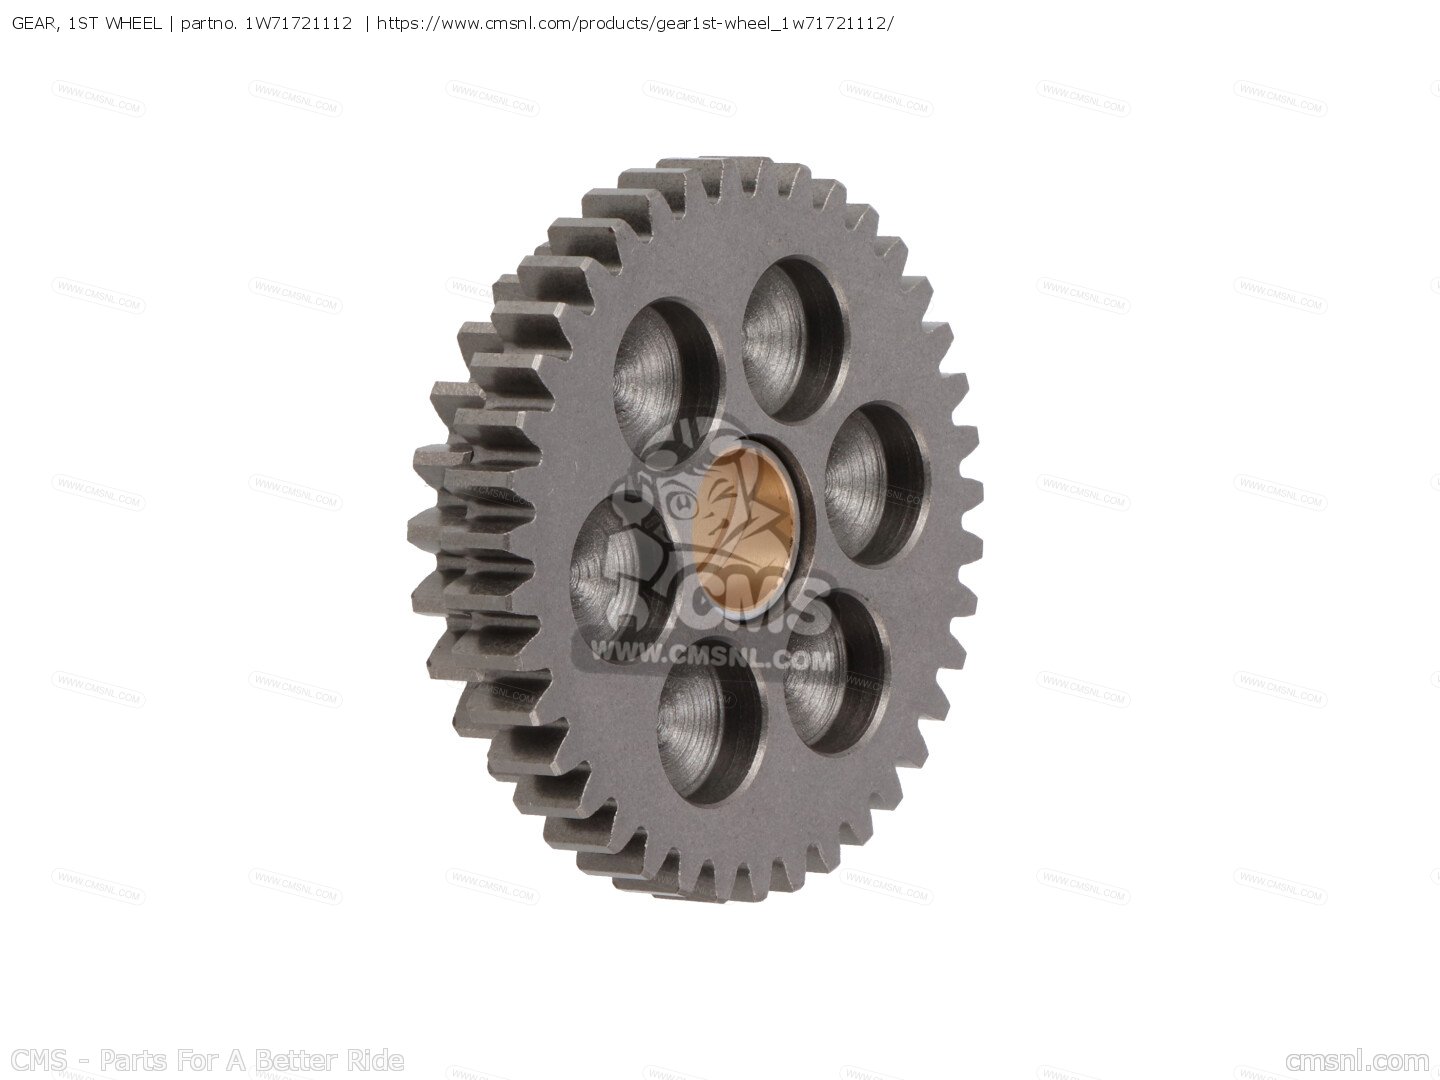 GEAR, 1ST WHEEL for PW80 2002 4BCC SPAIN 1A4BC-300E1 - order at CMSNL